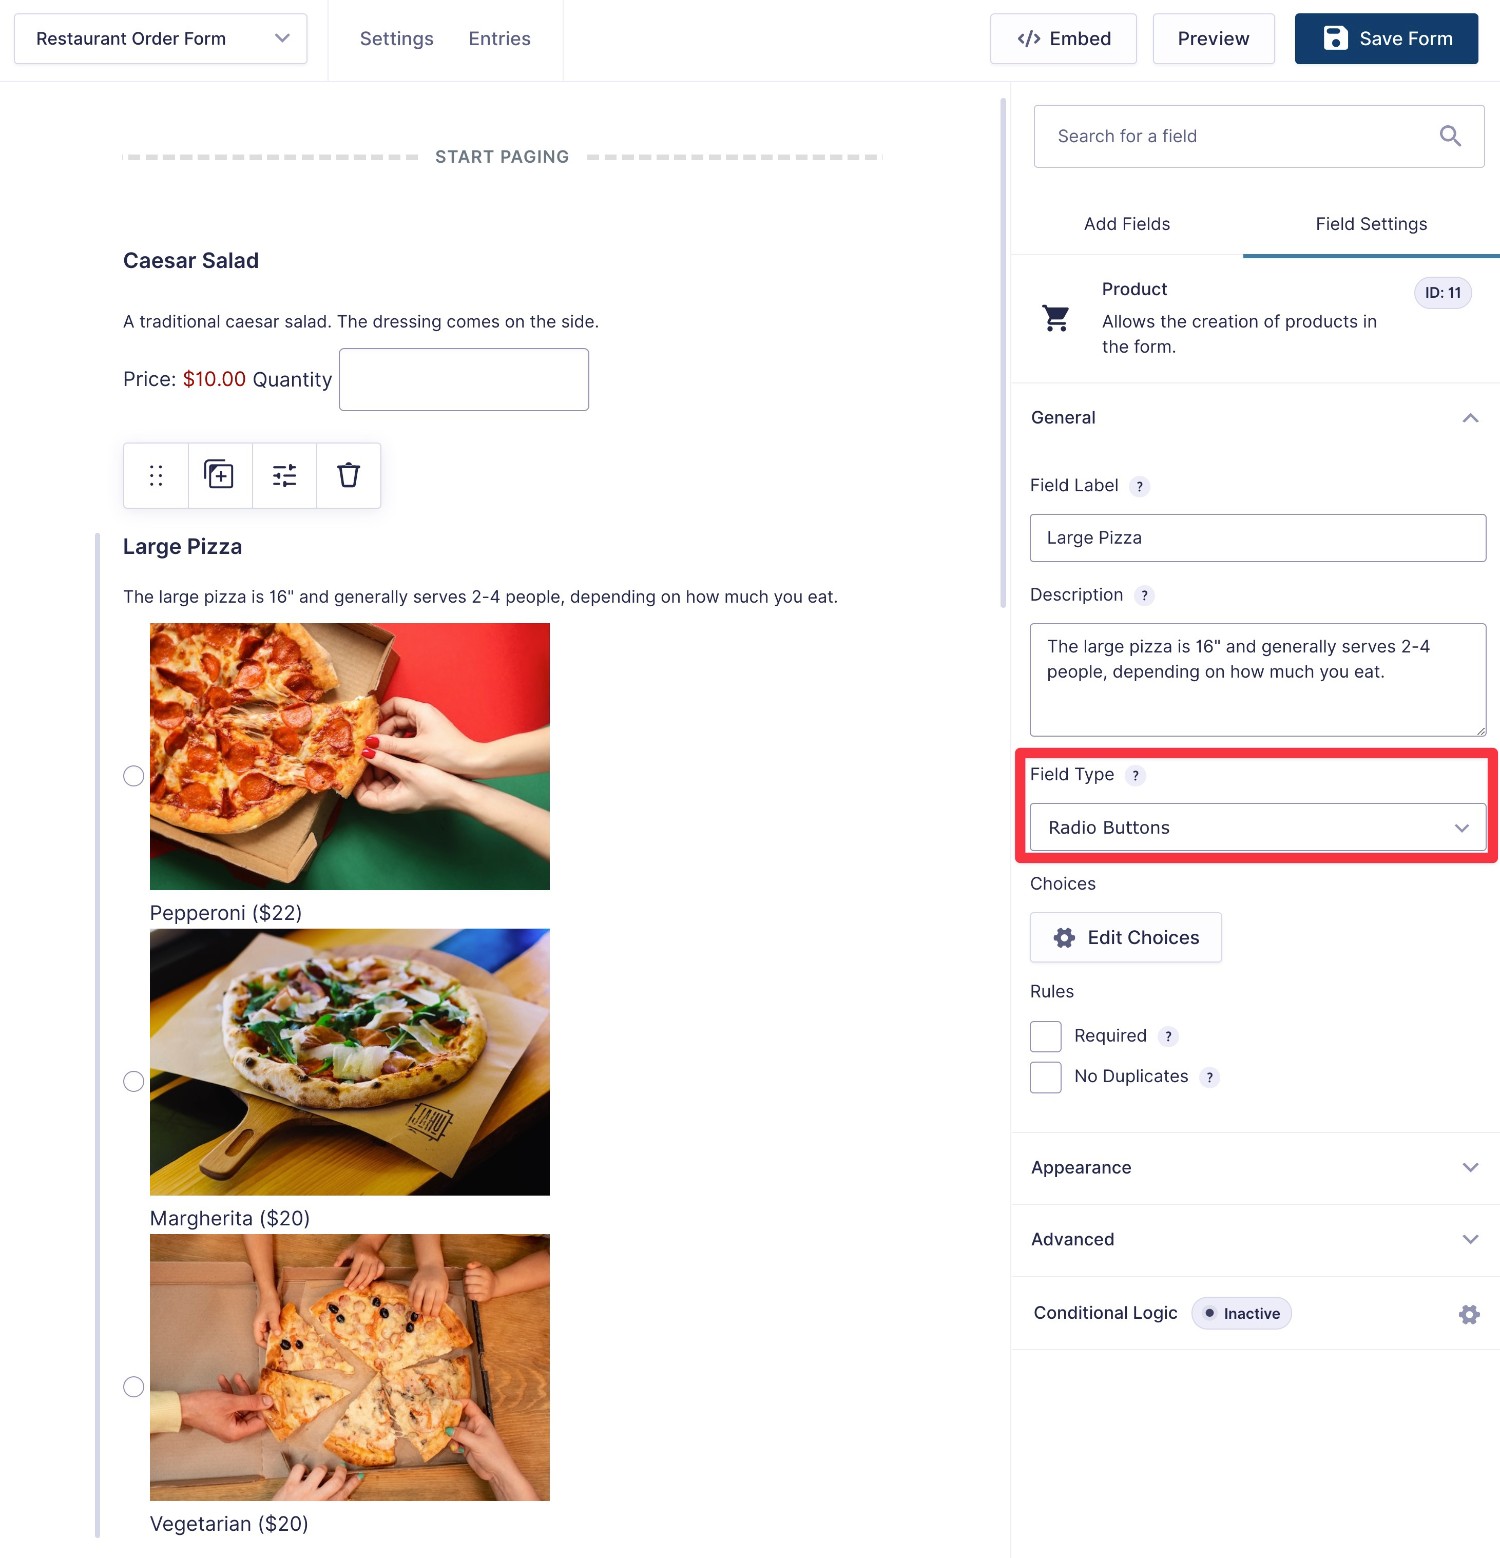 Adding menu items to your restaurant order form